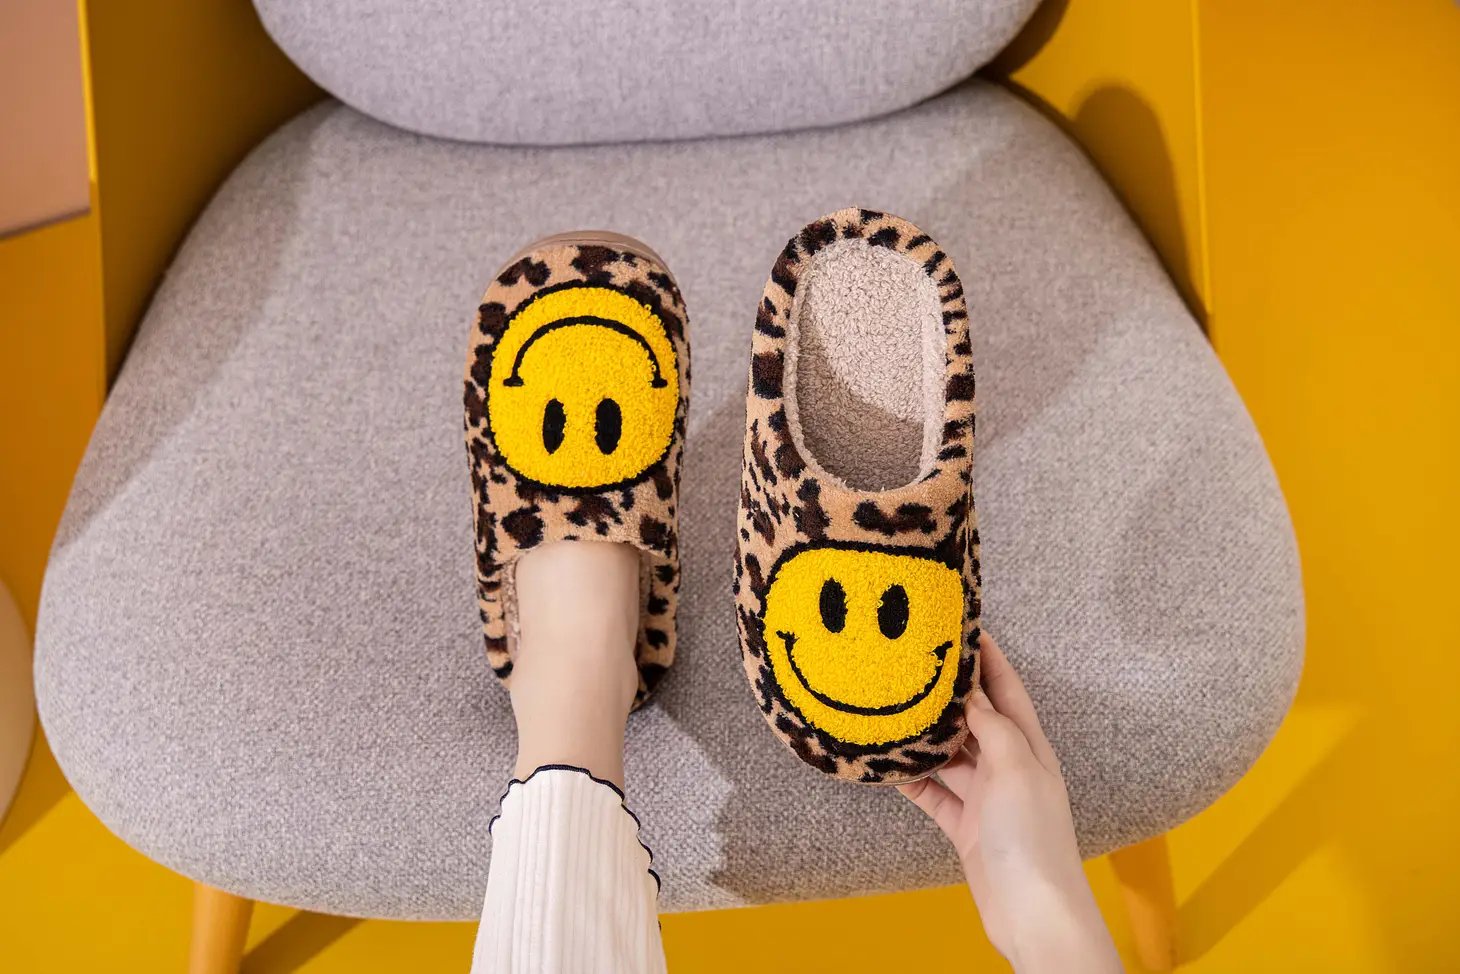 Smiley Face Fluffy Slippers (Leopard) - Small (5.5-6.5/37-38) - Slippers